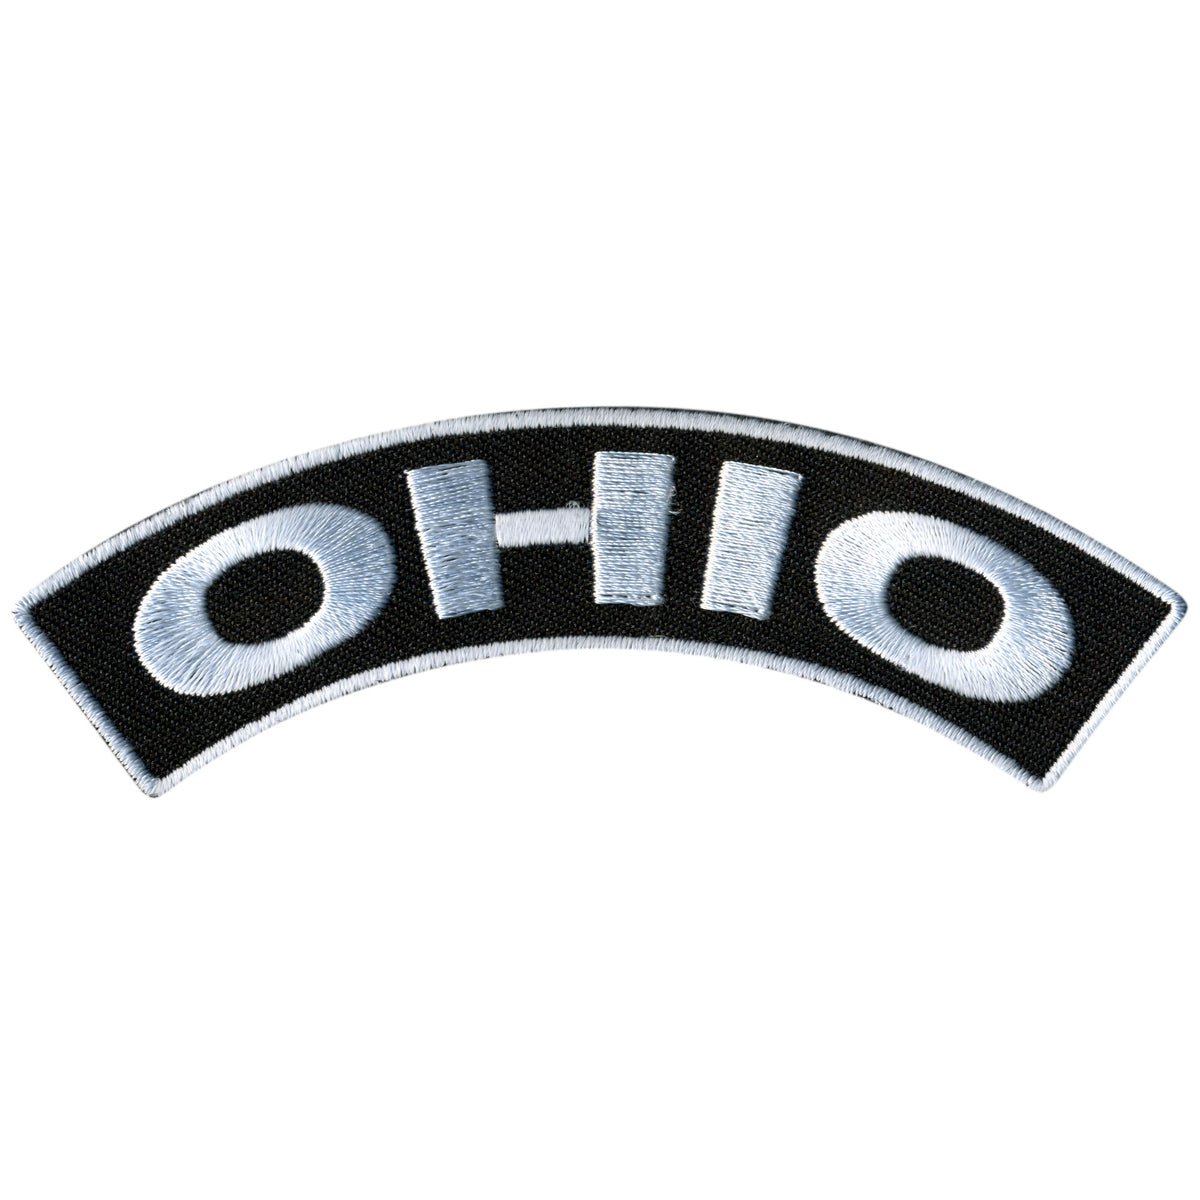 Hot Leathers Ohio 4” X 1” Top Rocker Patch